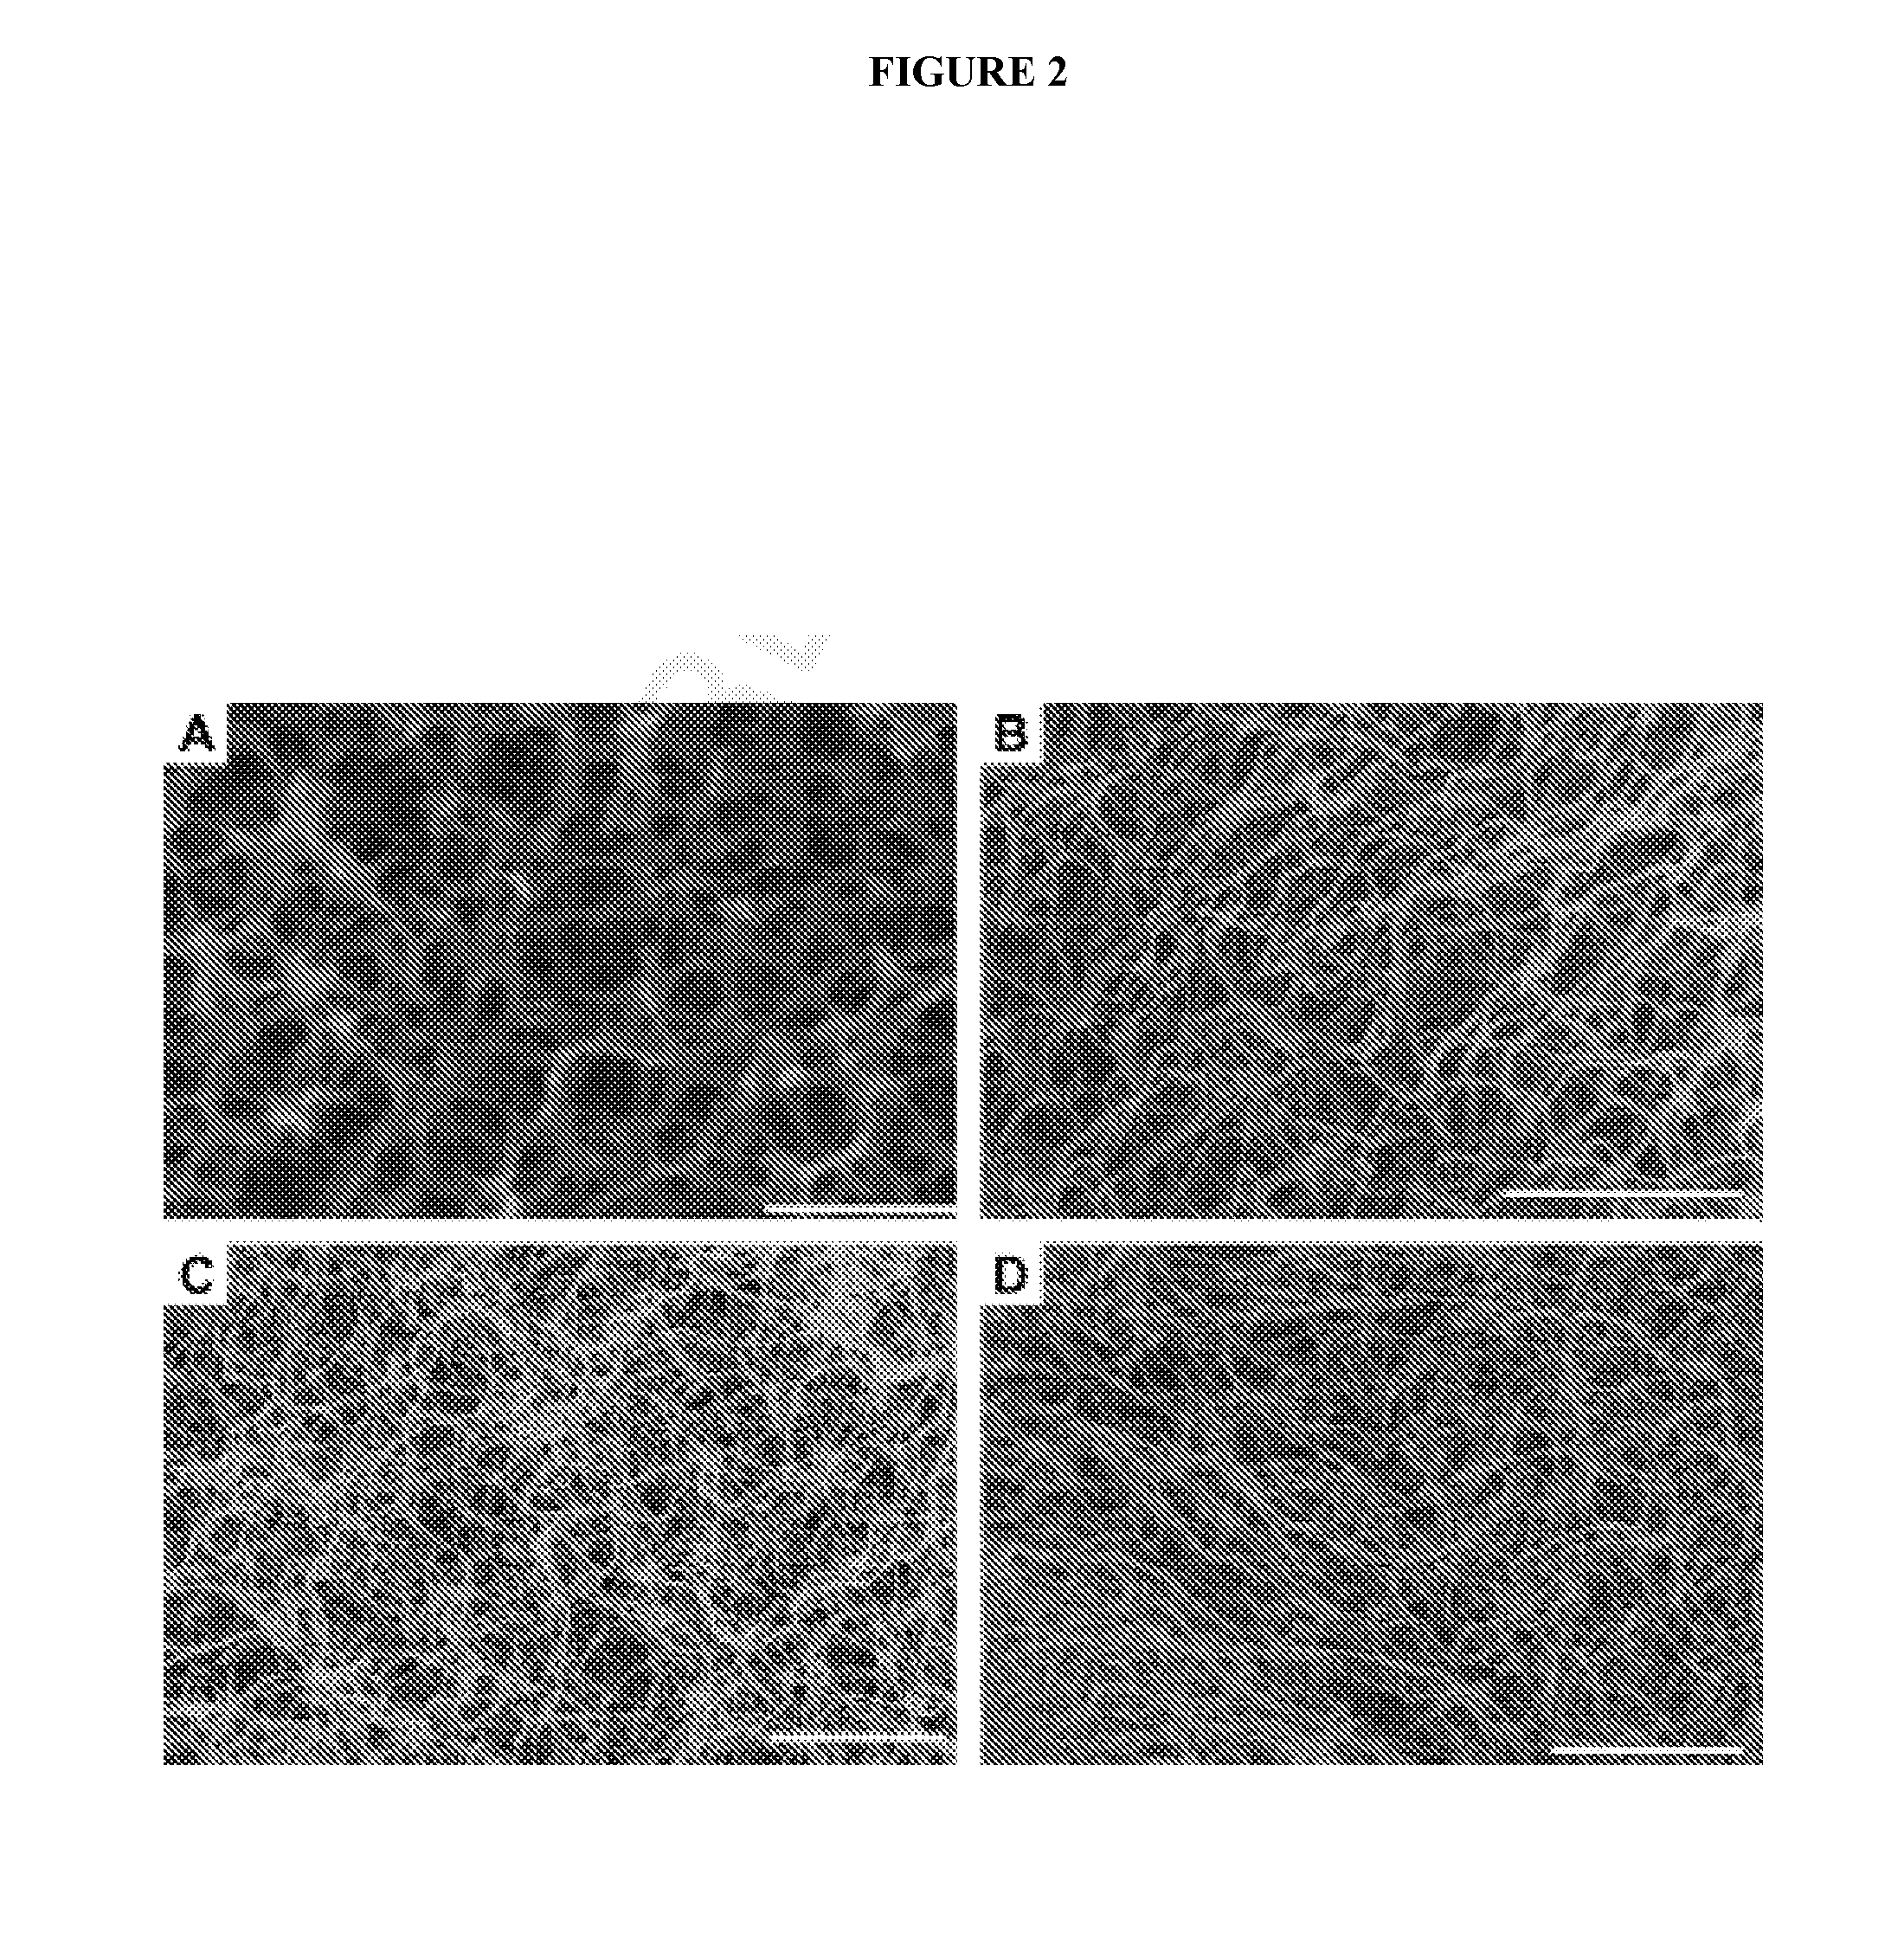 Interpenetrating biomaterial matrices and uses thereof